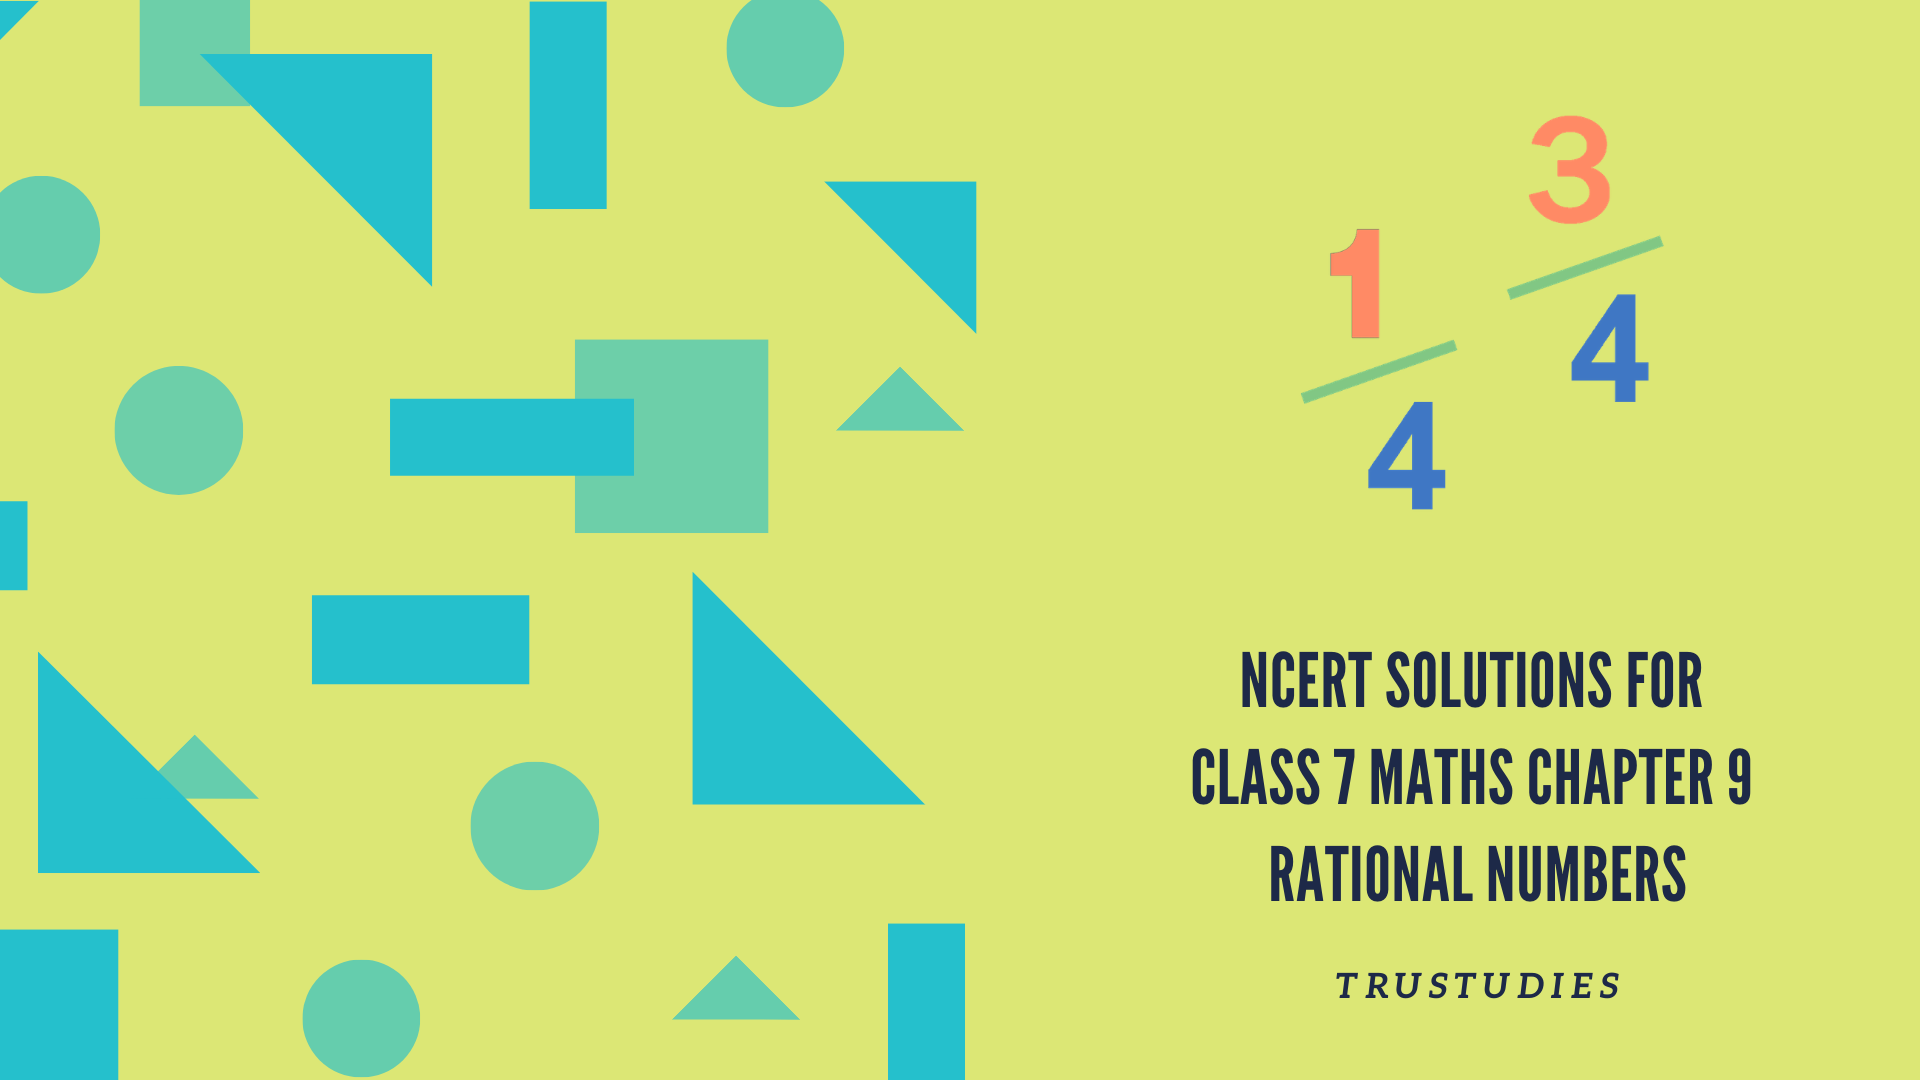 NCERT solutions for class 7 maths chapter 9 rational numbers banner image